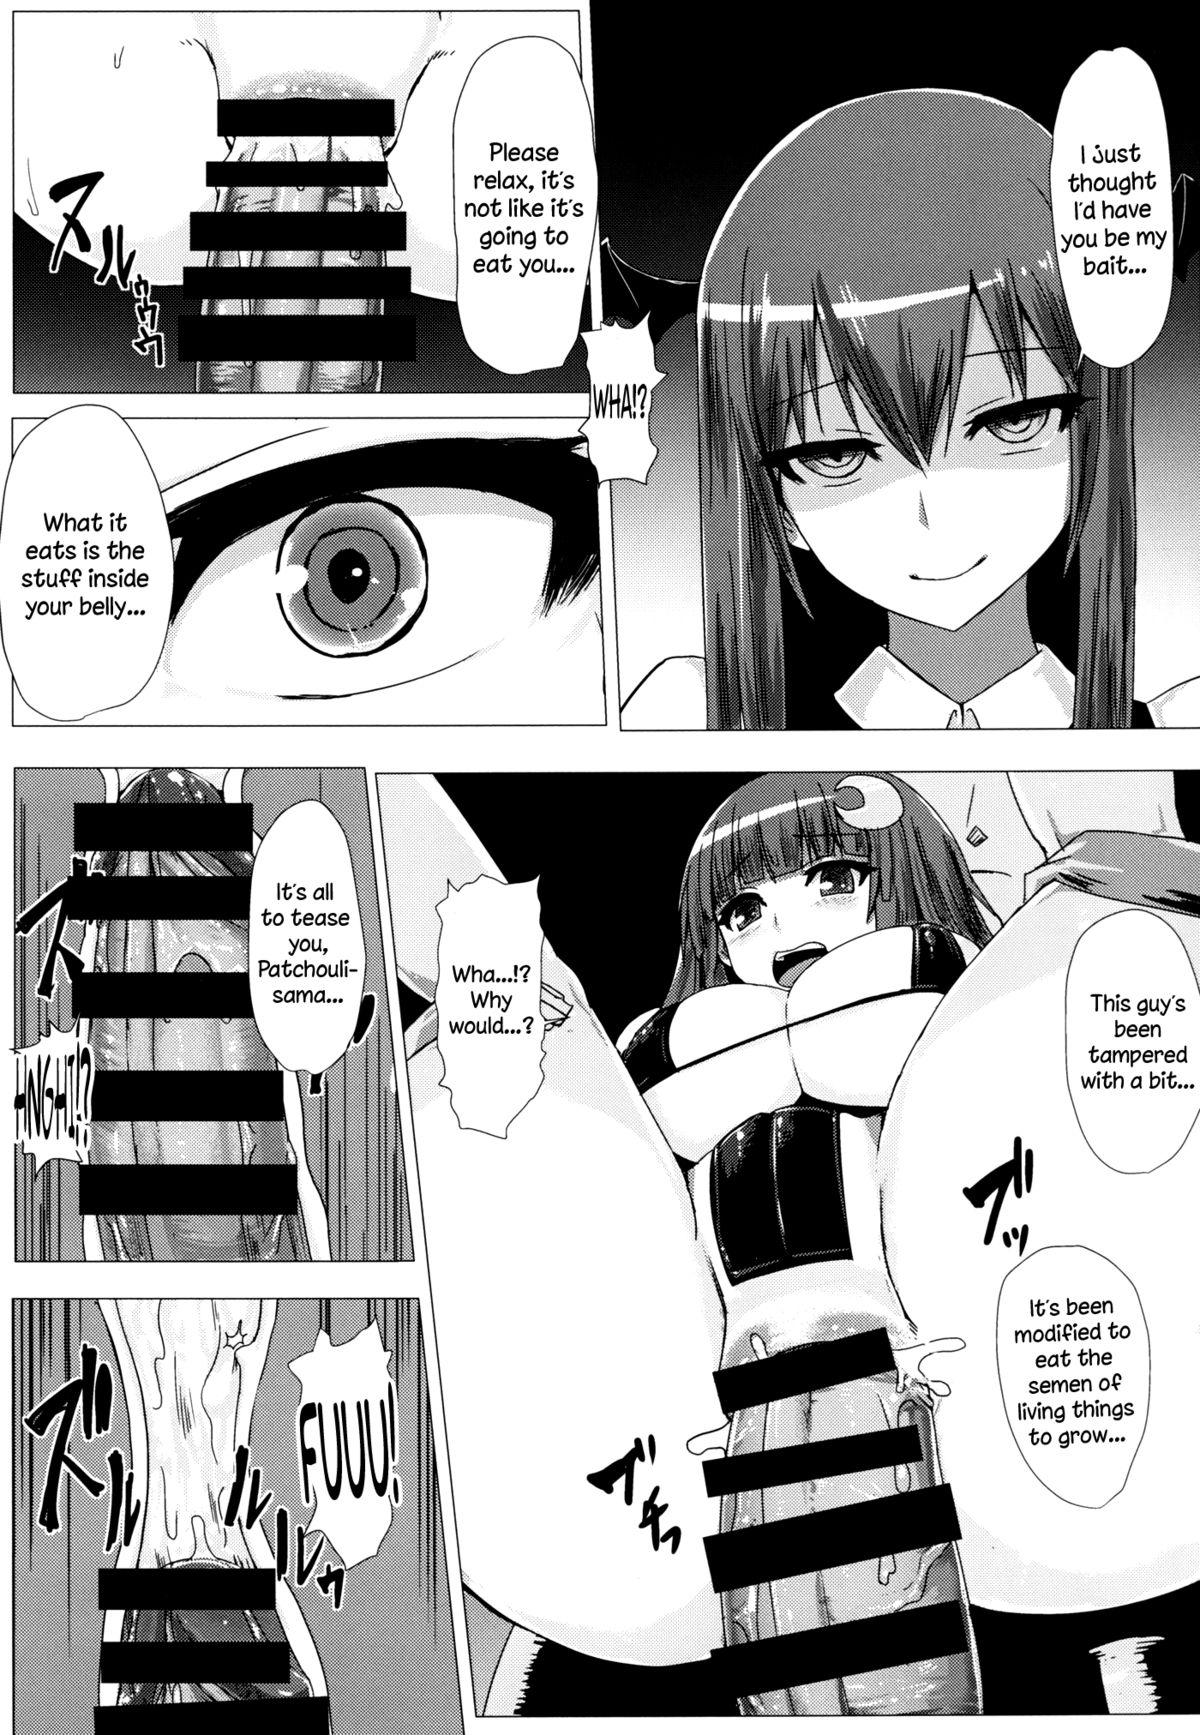 Sharing Shiri Pache Pache | Ass Patchy Patchy - Touhou project Boots - Page 10